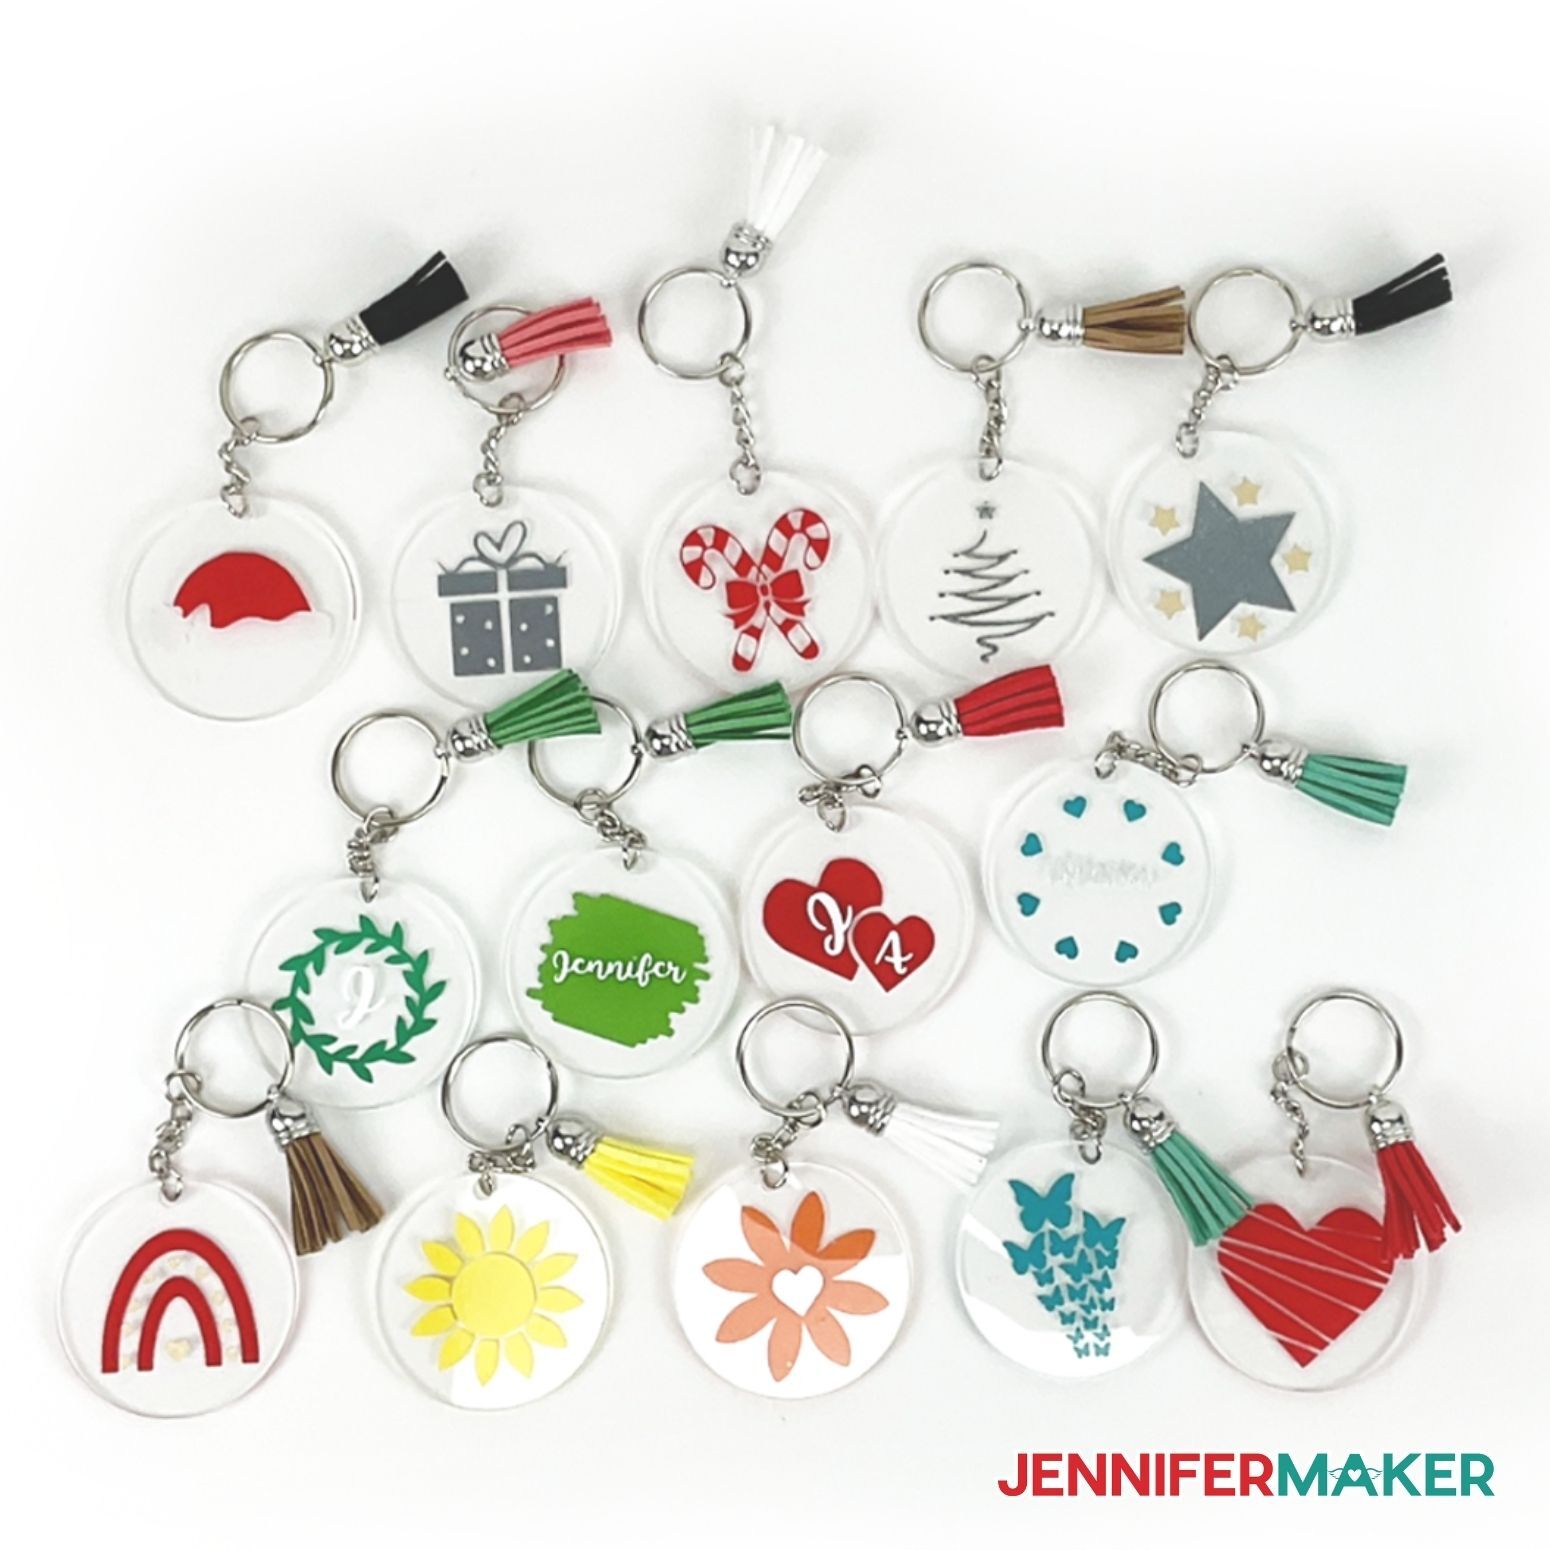 15 Free Keychain Holder SVG Templates for Display Cards